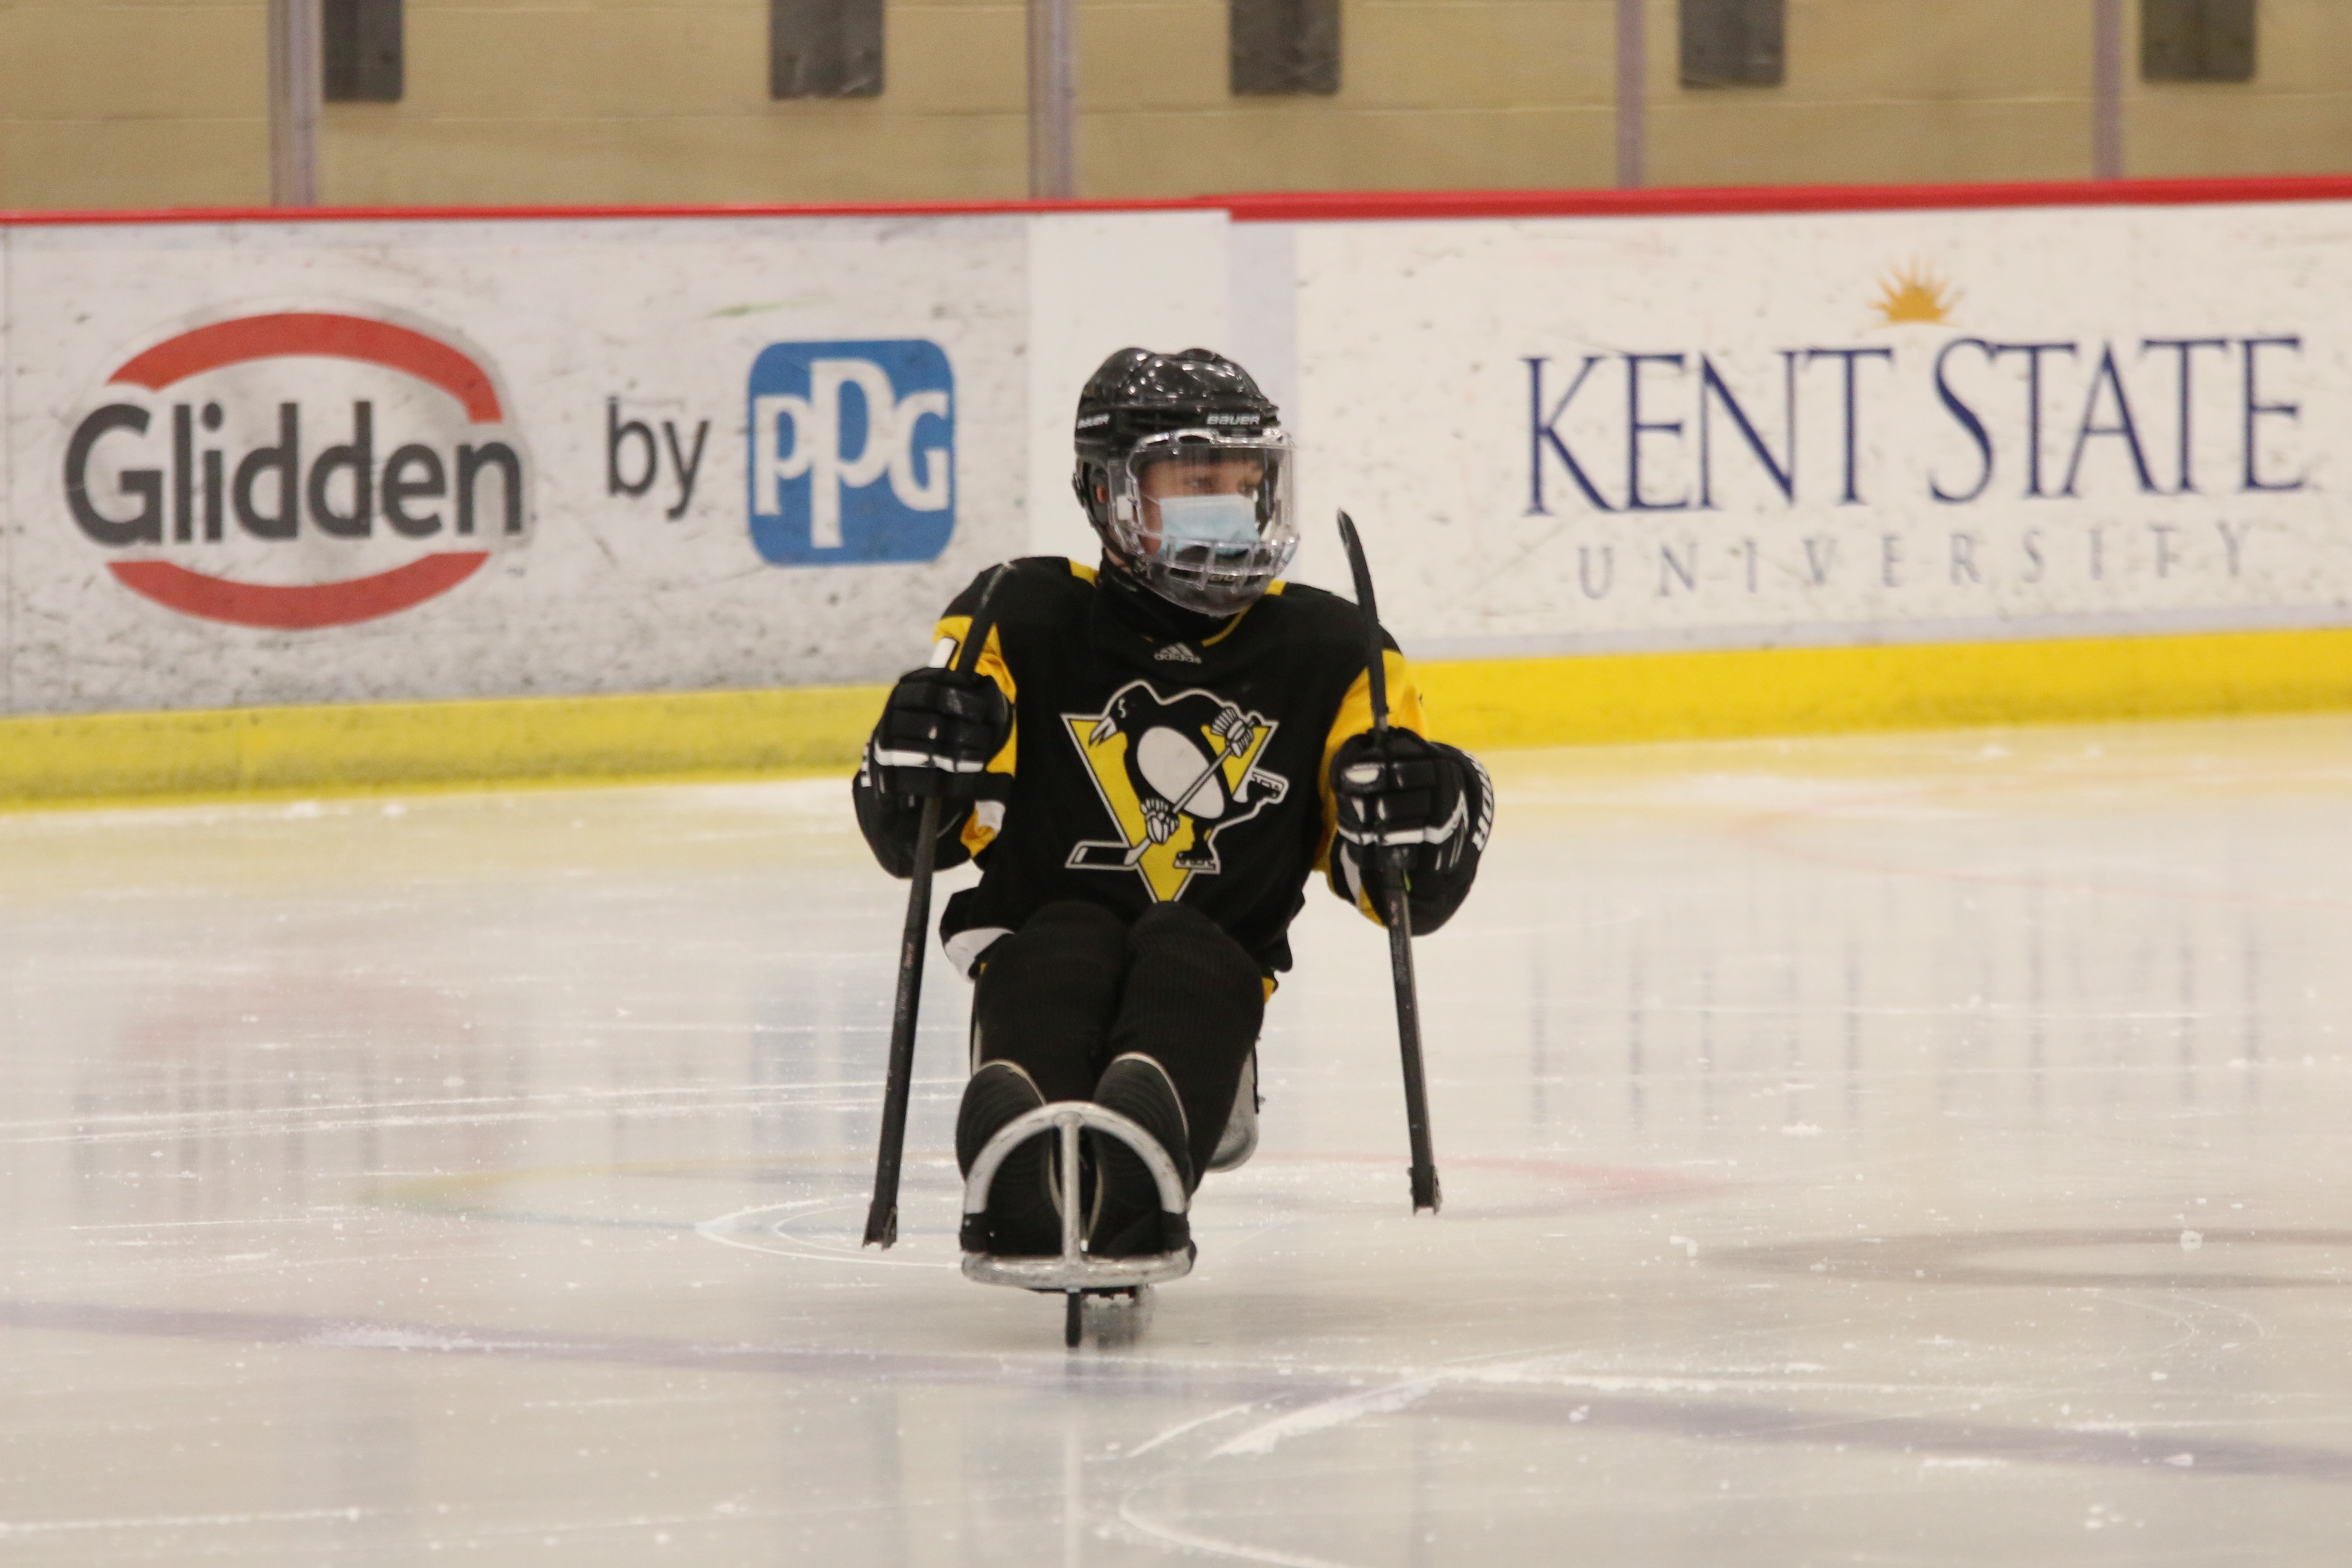 A player propels themself across the ice on a hockey sled